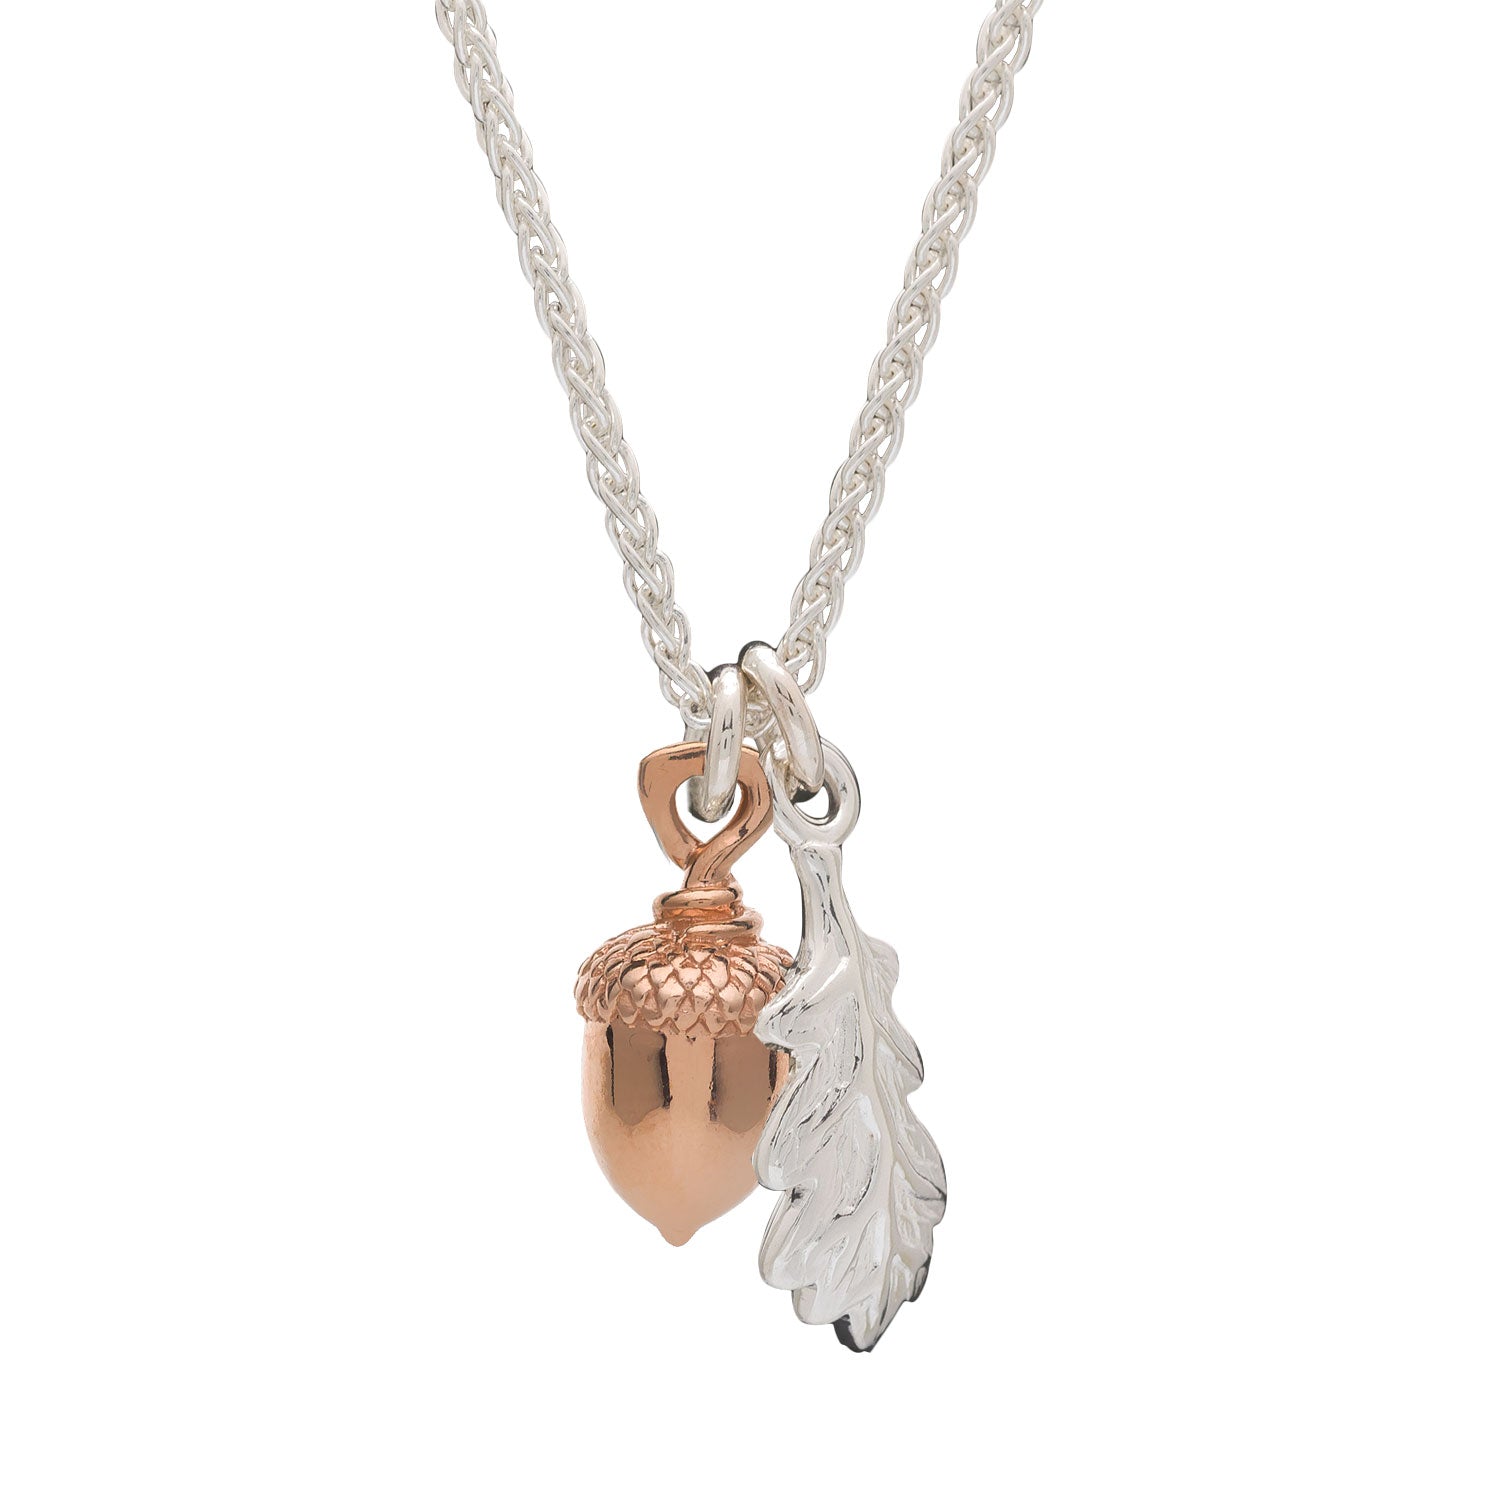 Solid Silver and Rose Gold Acorn Oak Leaf Necklace - Elegant pendant with rose gold acorn, silver oak leaf, and 1.1mm chain link. Nature-inspired luxury jewelry, crafted with precision and weighing 3.6g. Unique blend of solid silver and rose gold, a symbol of timeless beauty and craftsmanship.